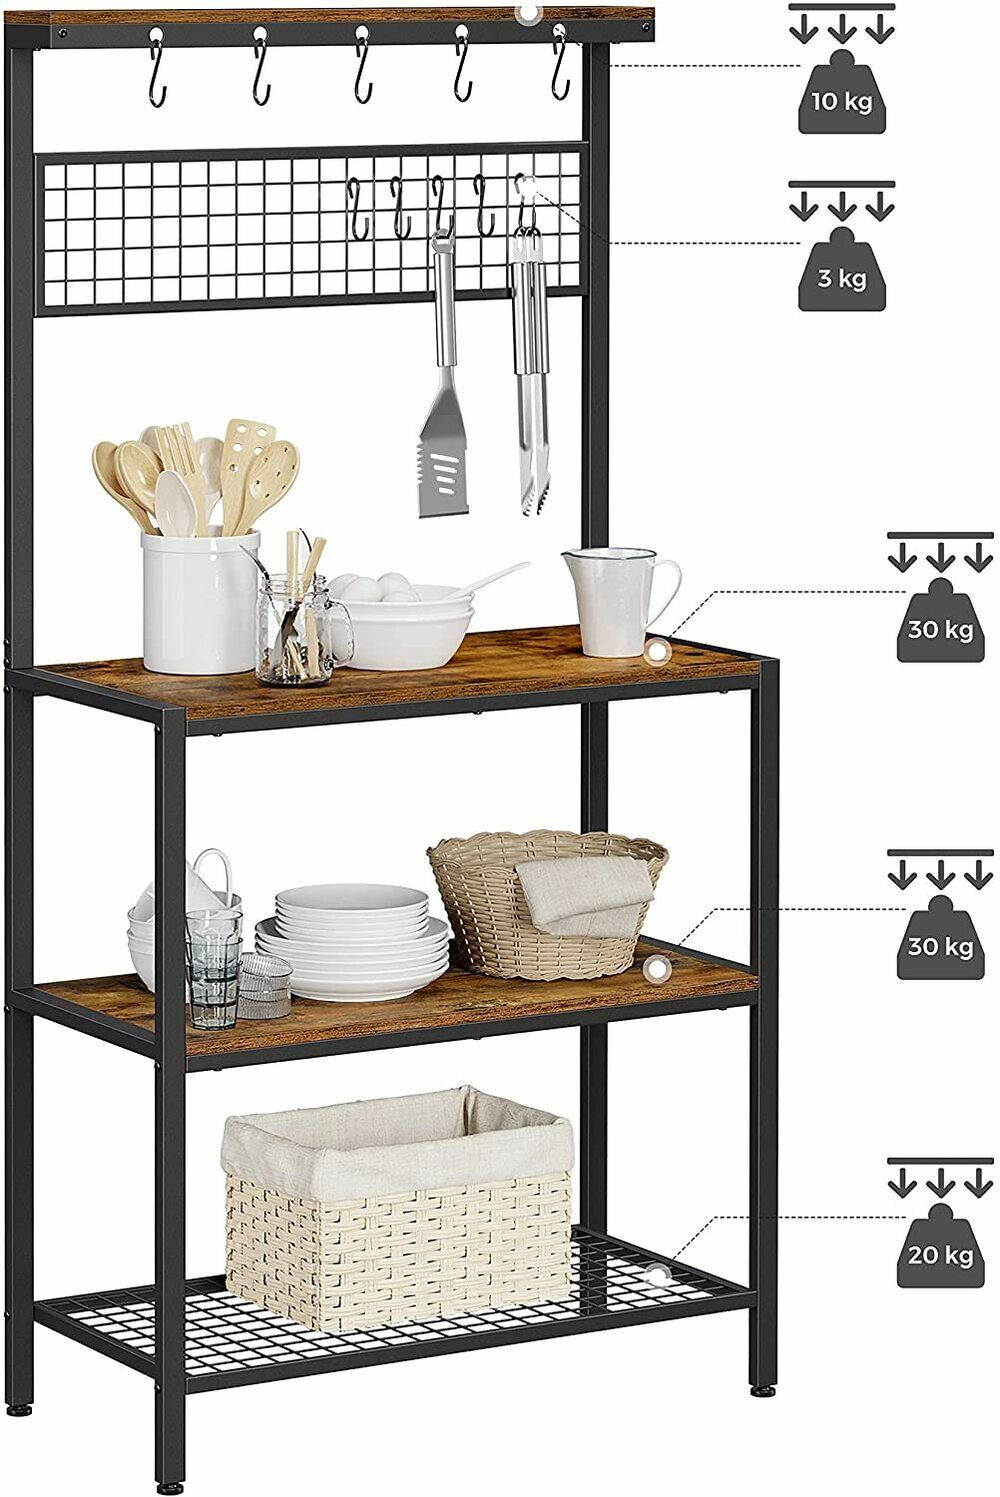 VASAGLE 4-Tier Kitchen Bakers Rack Storage Cabinet Microwave Oven Stand Shelves Pantry